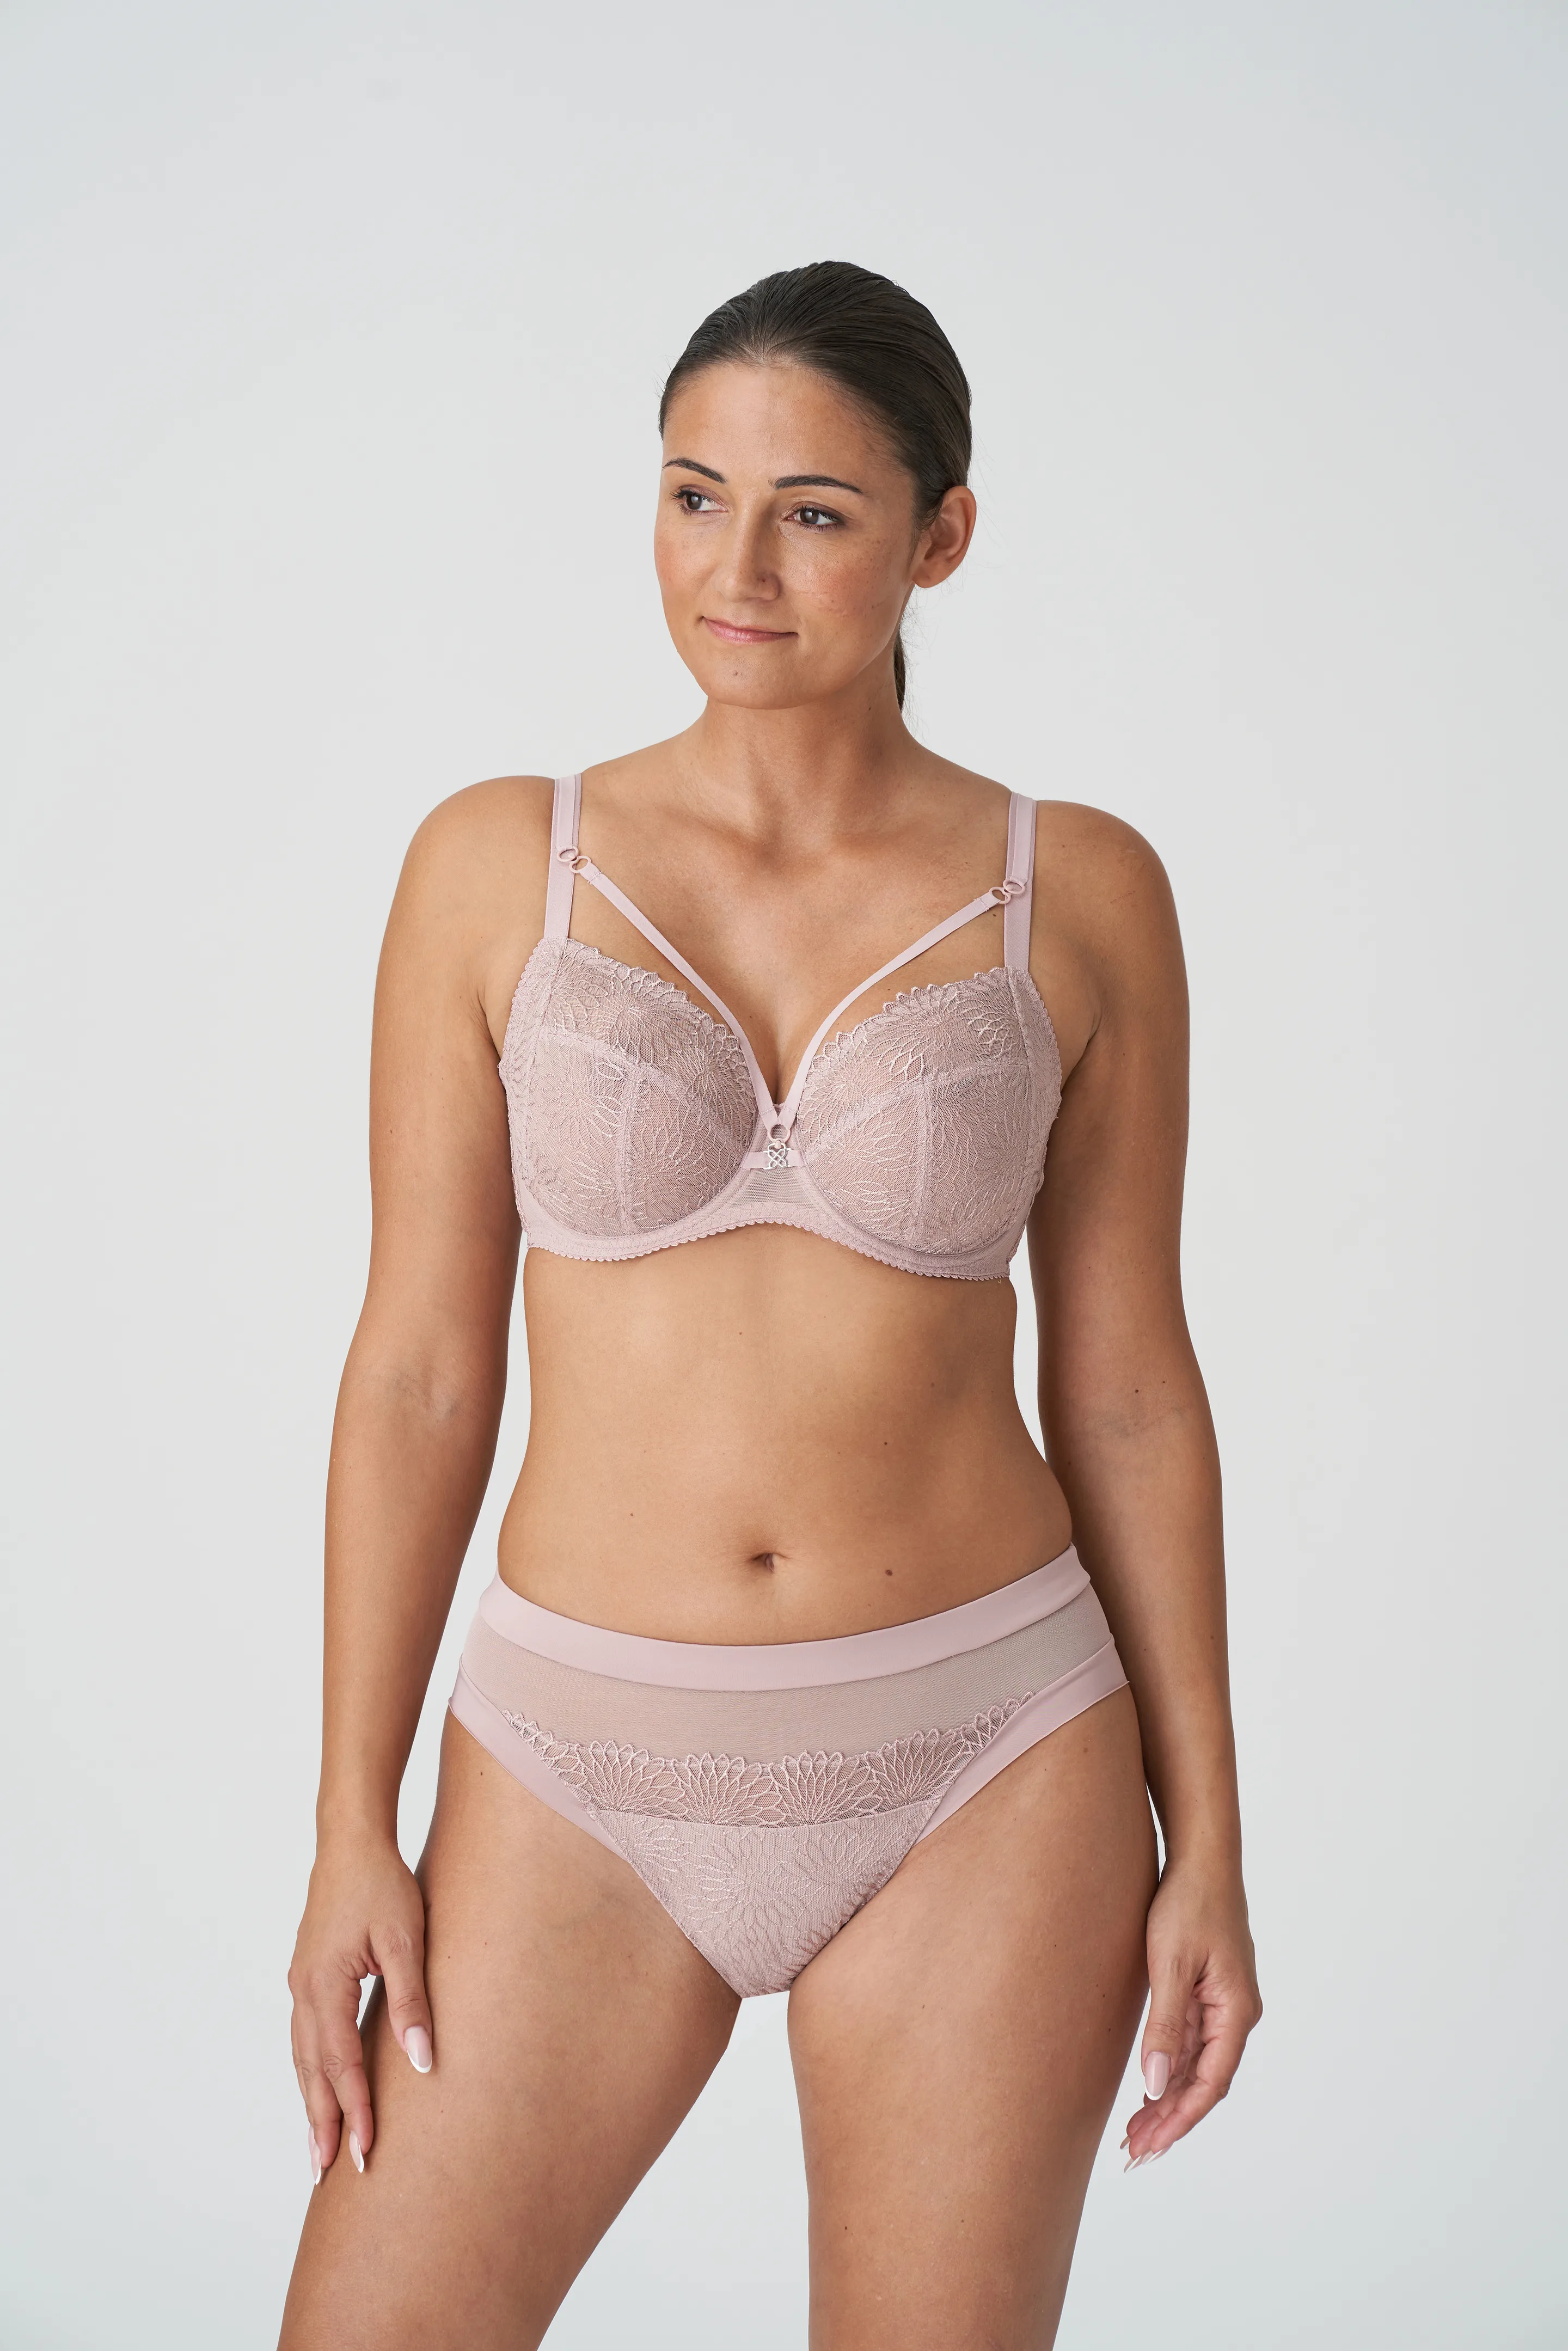 38E Size Bras: Buy 38E Size Bras for Women Online at Low Prices